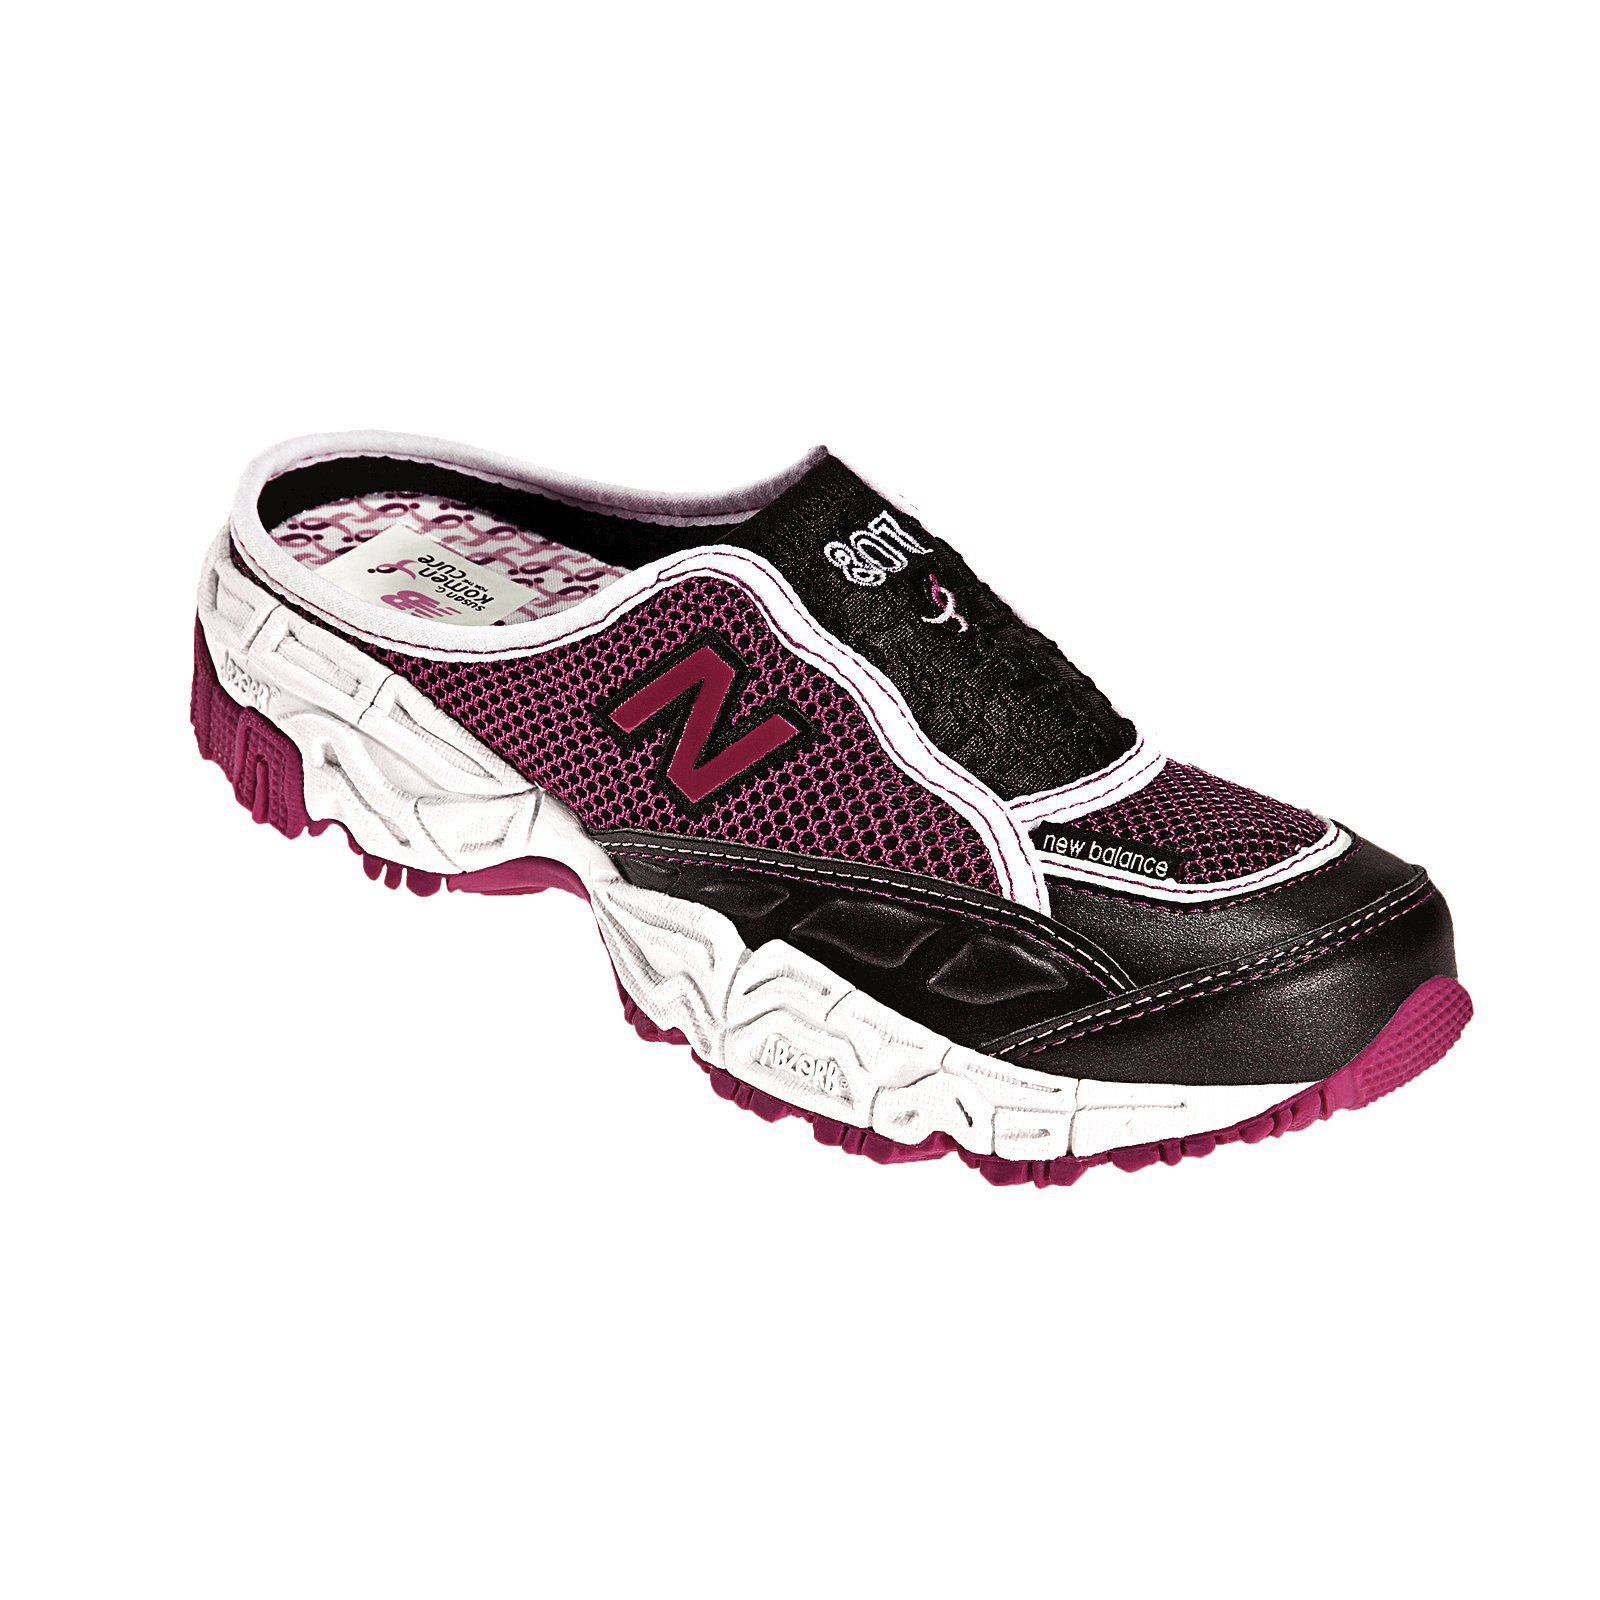 New Balance Women's 801 Casual Athletic  Shoe - Black/Pink